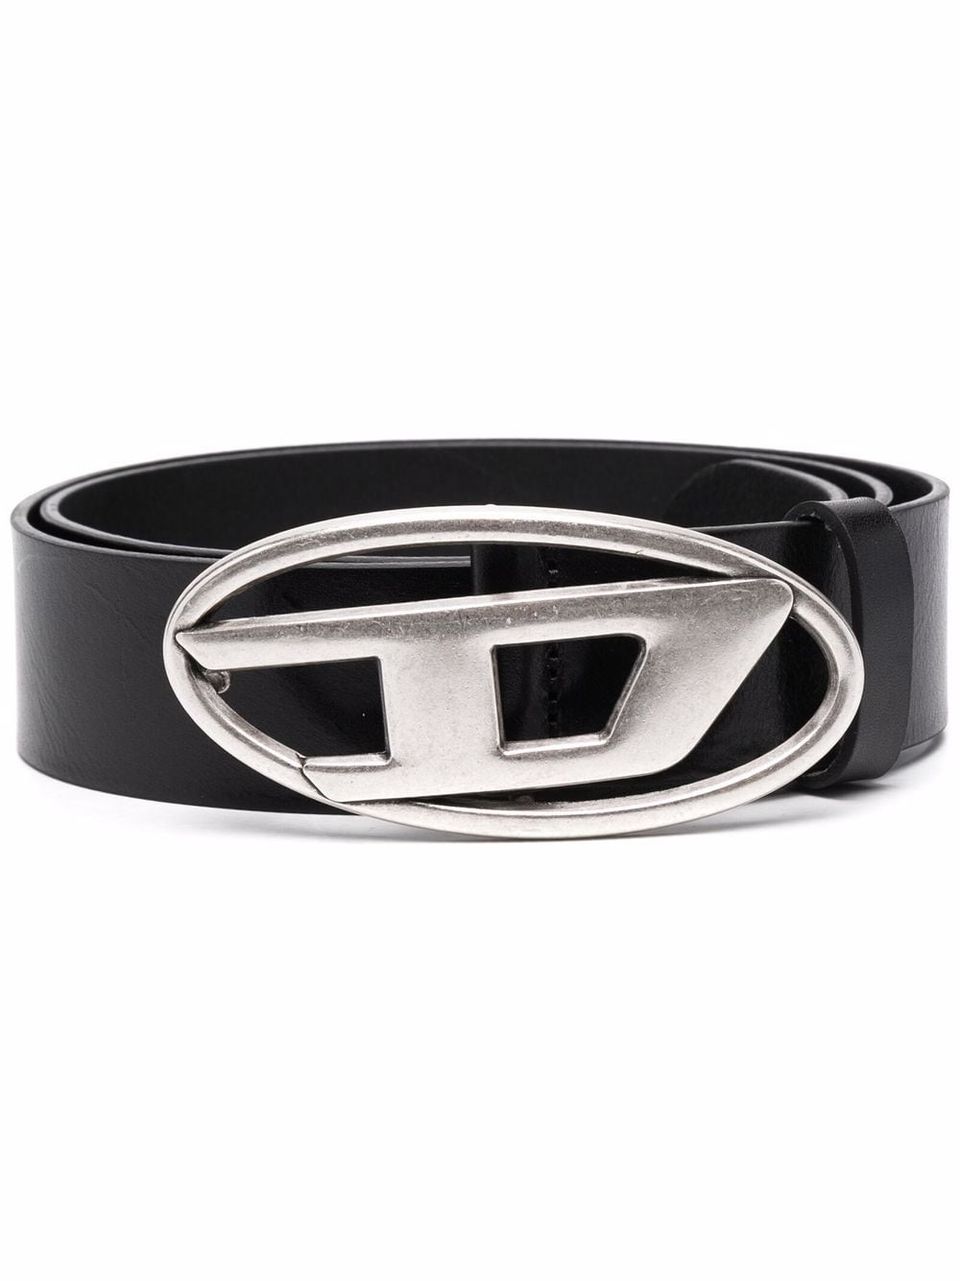 Vegetable leather belt with D logo buckle